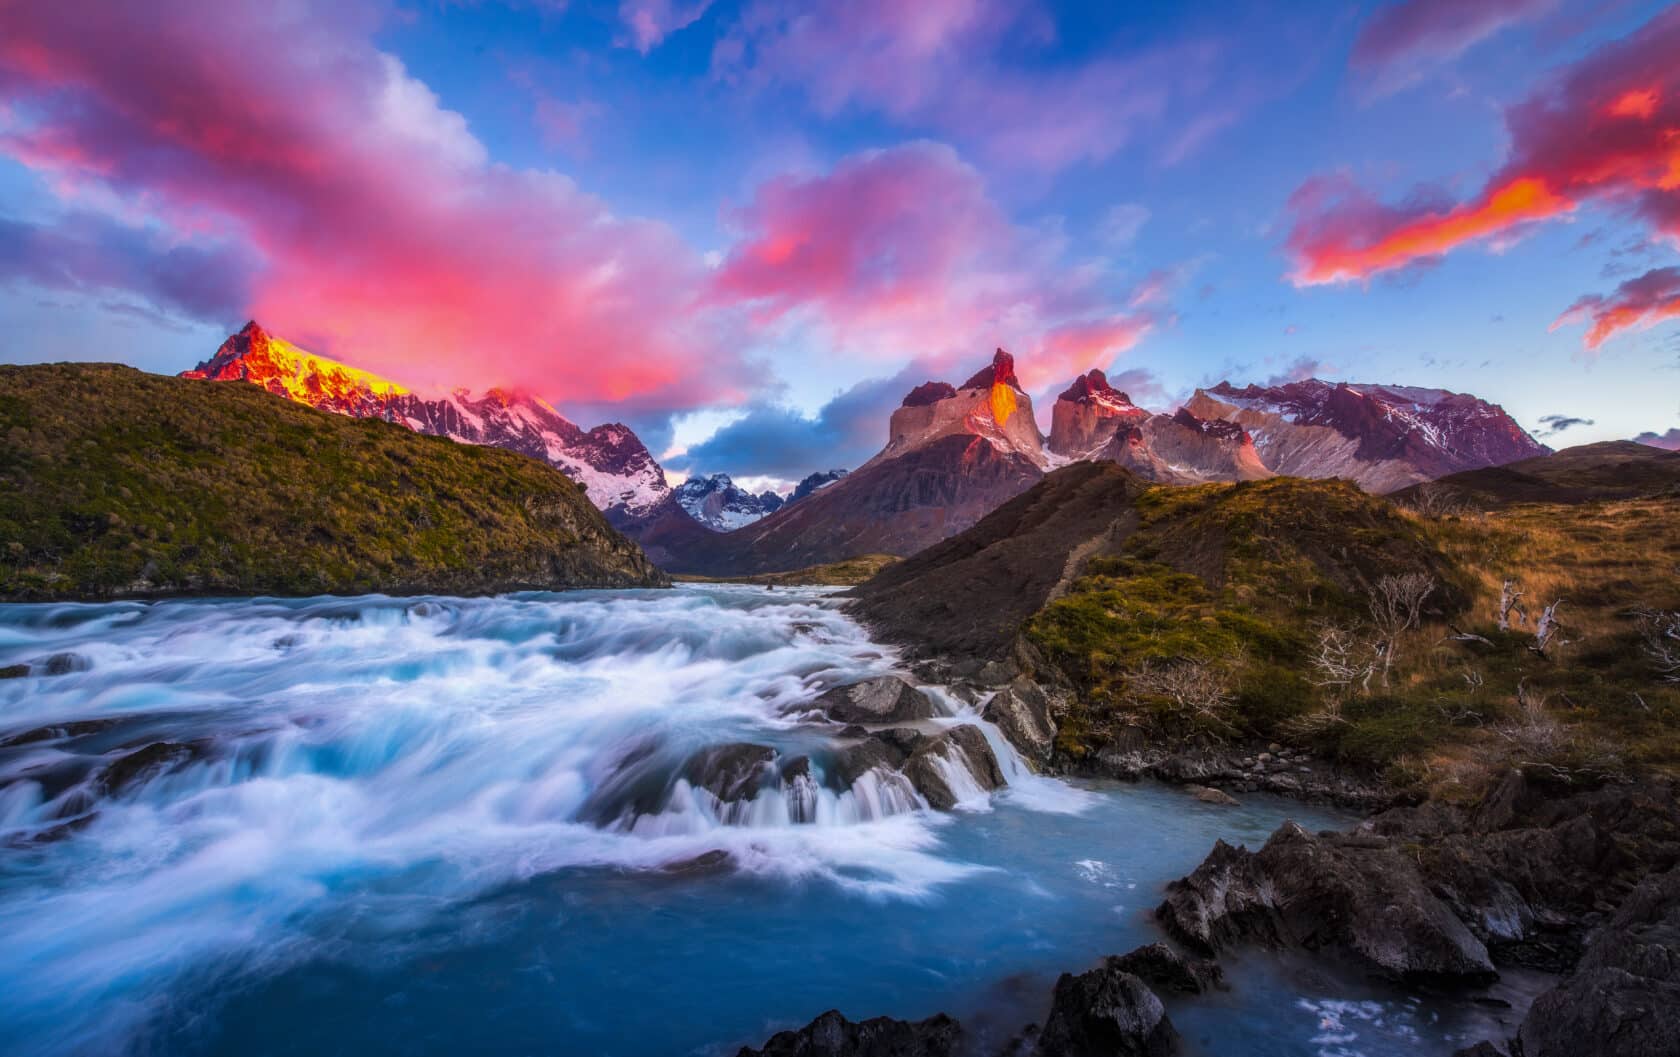 beautiful view of Salto Grande waterfall in Torres del Paine national park